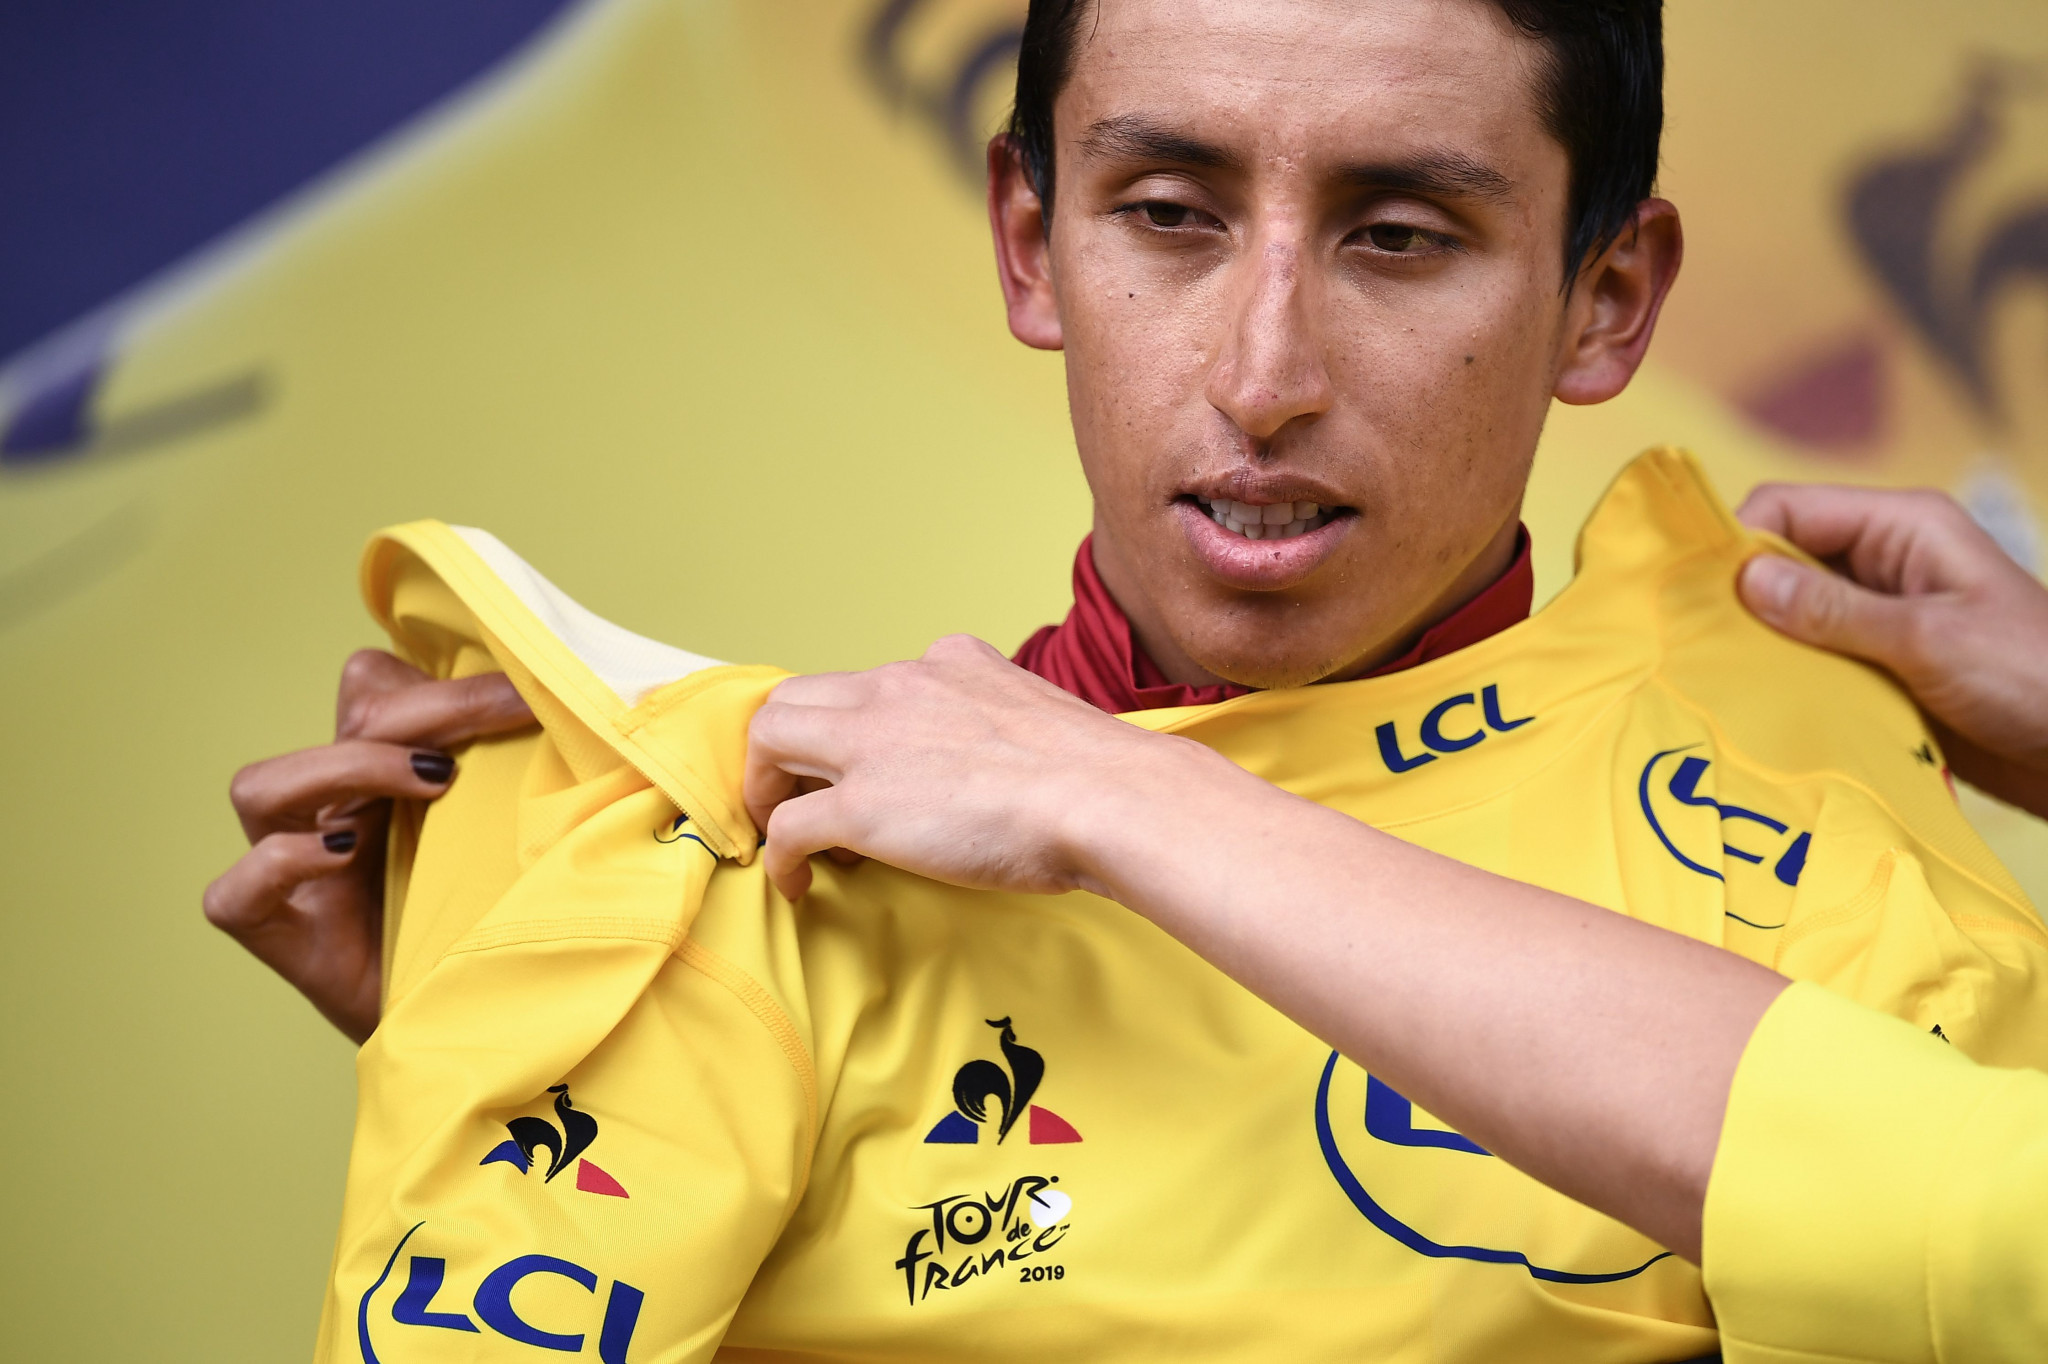 Le Coq Sportif, supplier of the famous Tour de France yellow jersey since 2012, has won the right to kit out the national team at Paris 2024 ©Getty Images